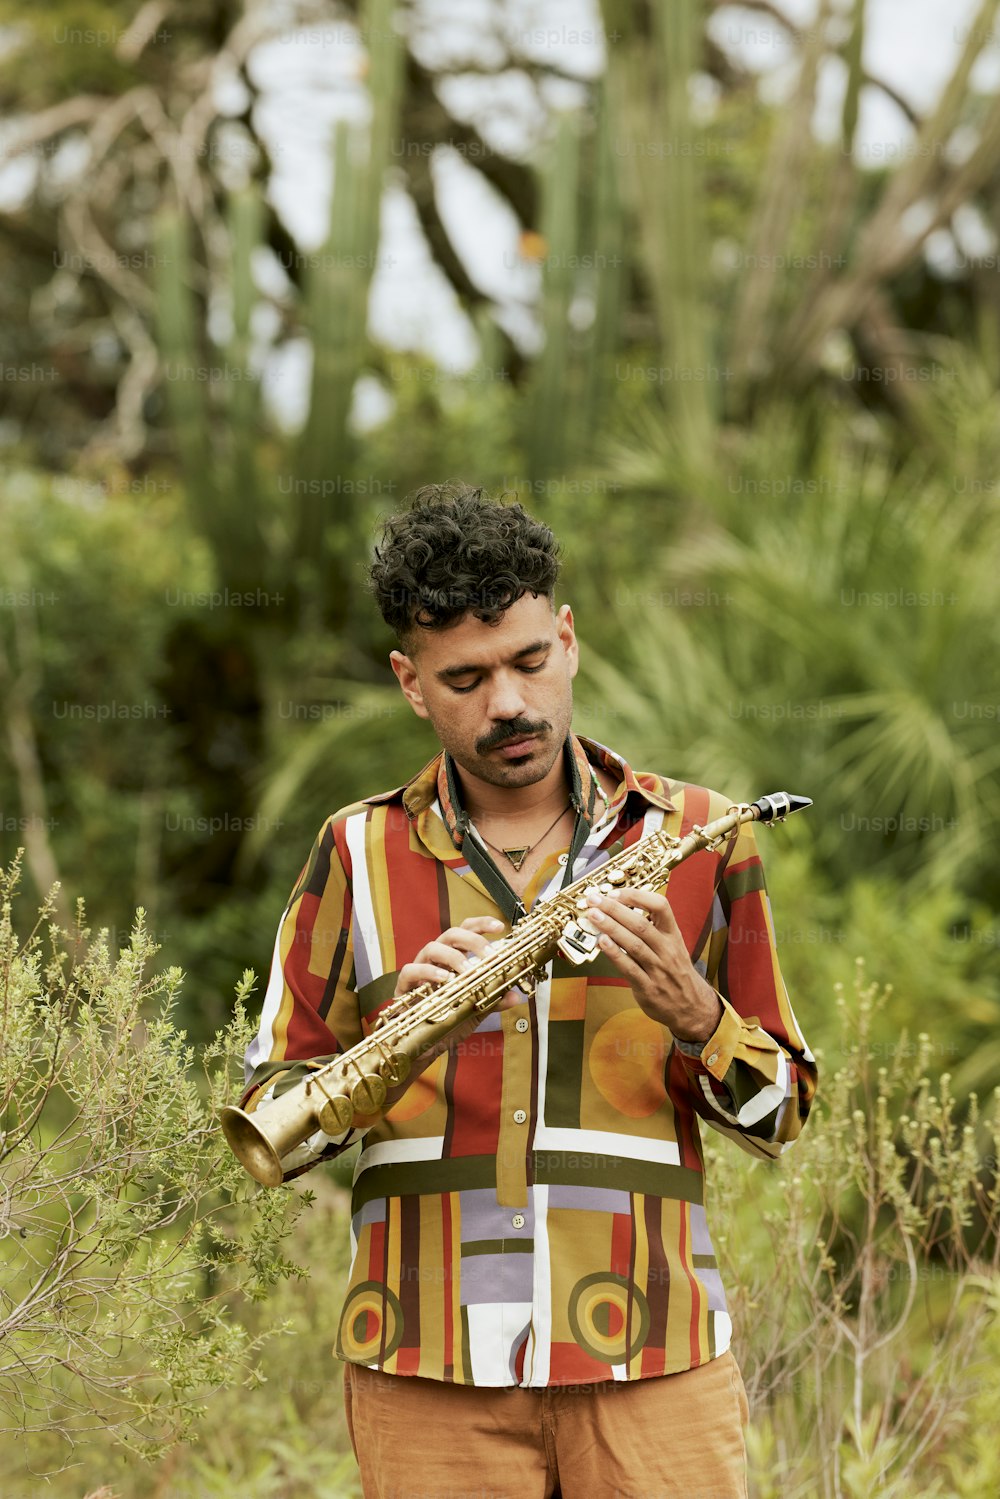 a man is playing a musical instrument in a field